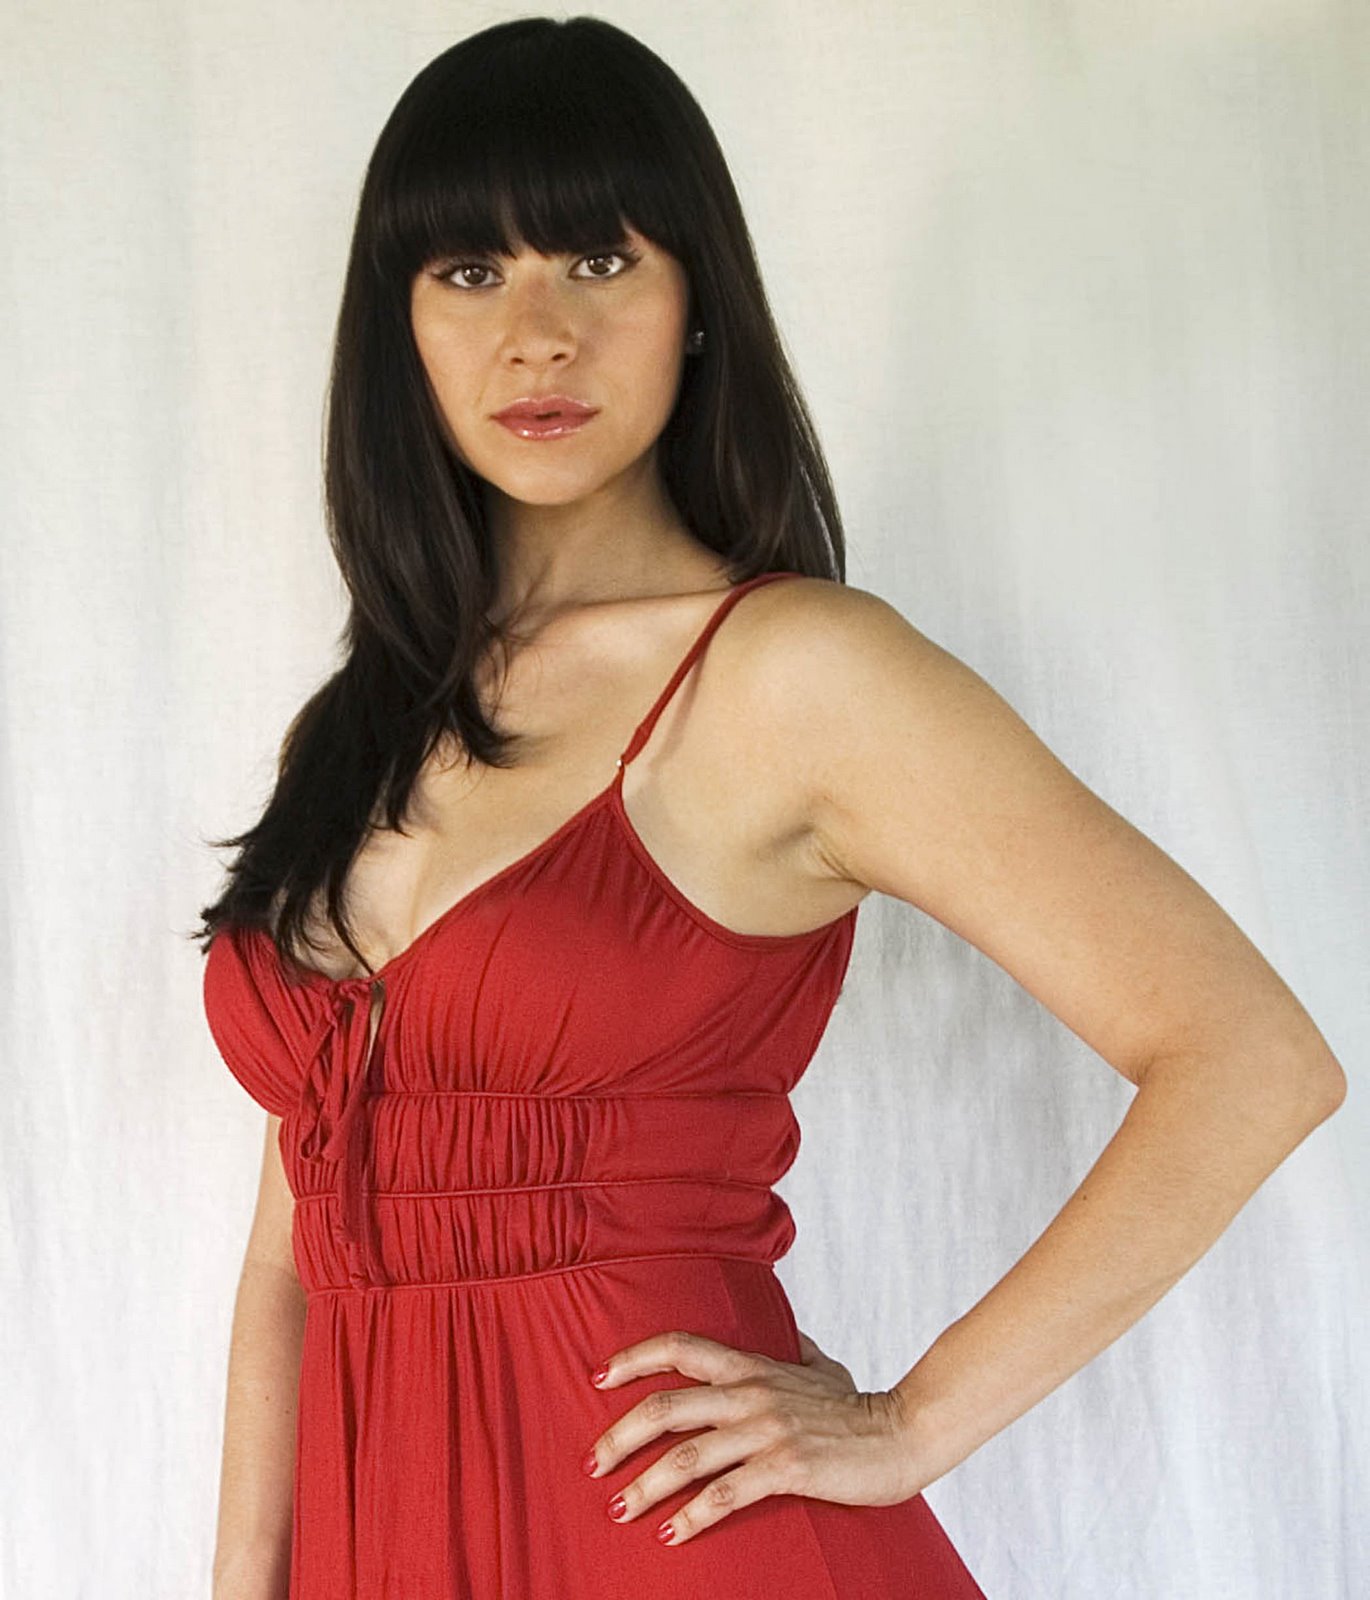 [Christina+In+the+Red+Dress+1+Color+Web+Shot.jpg]